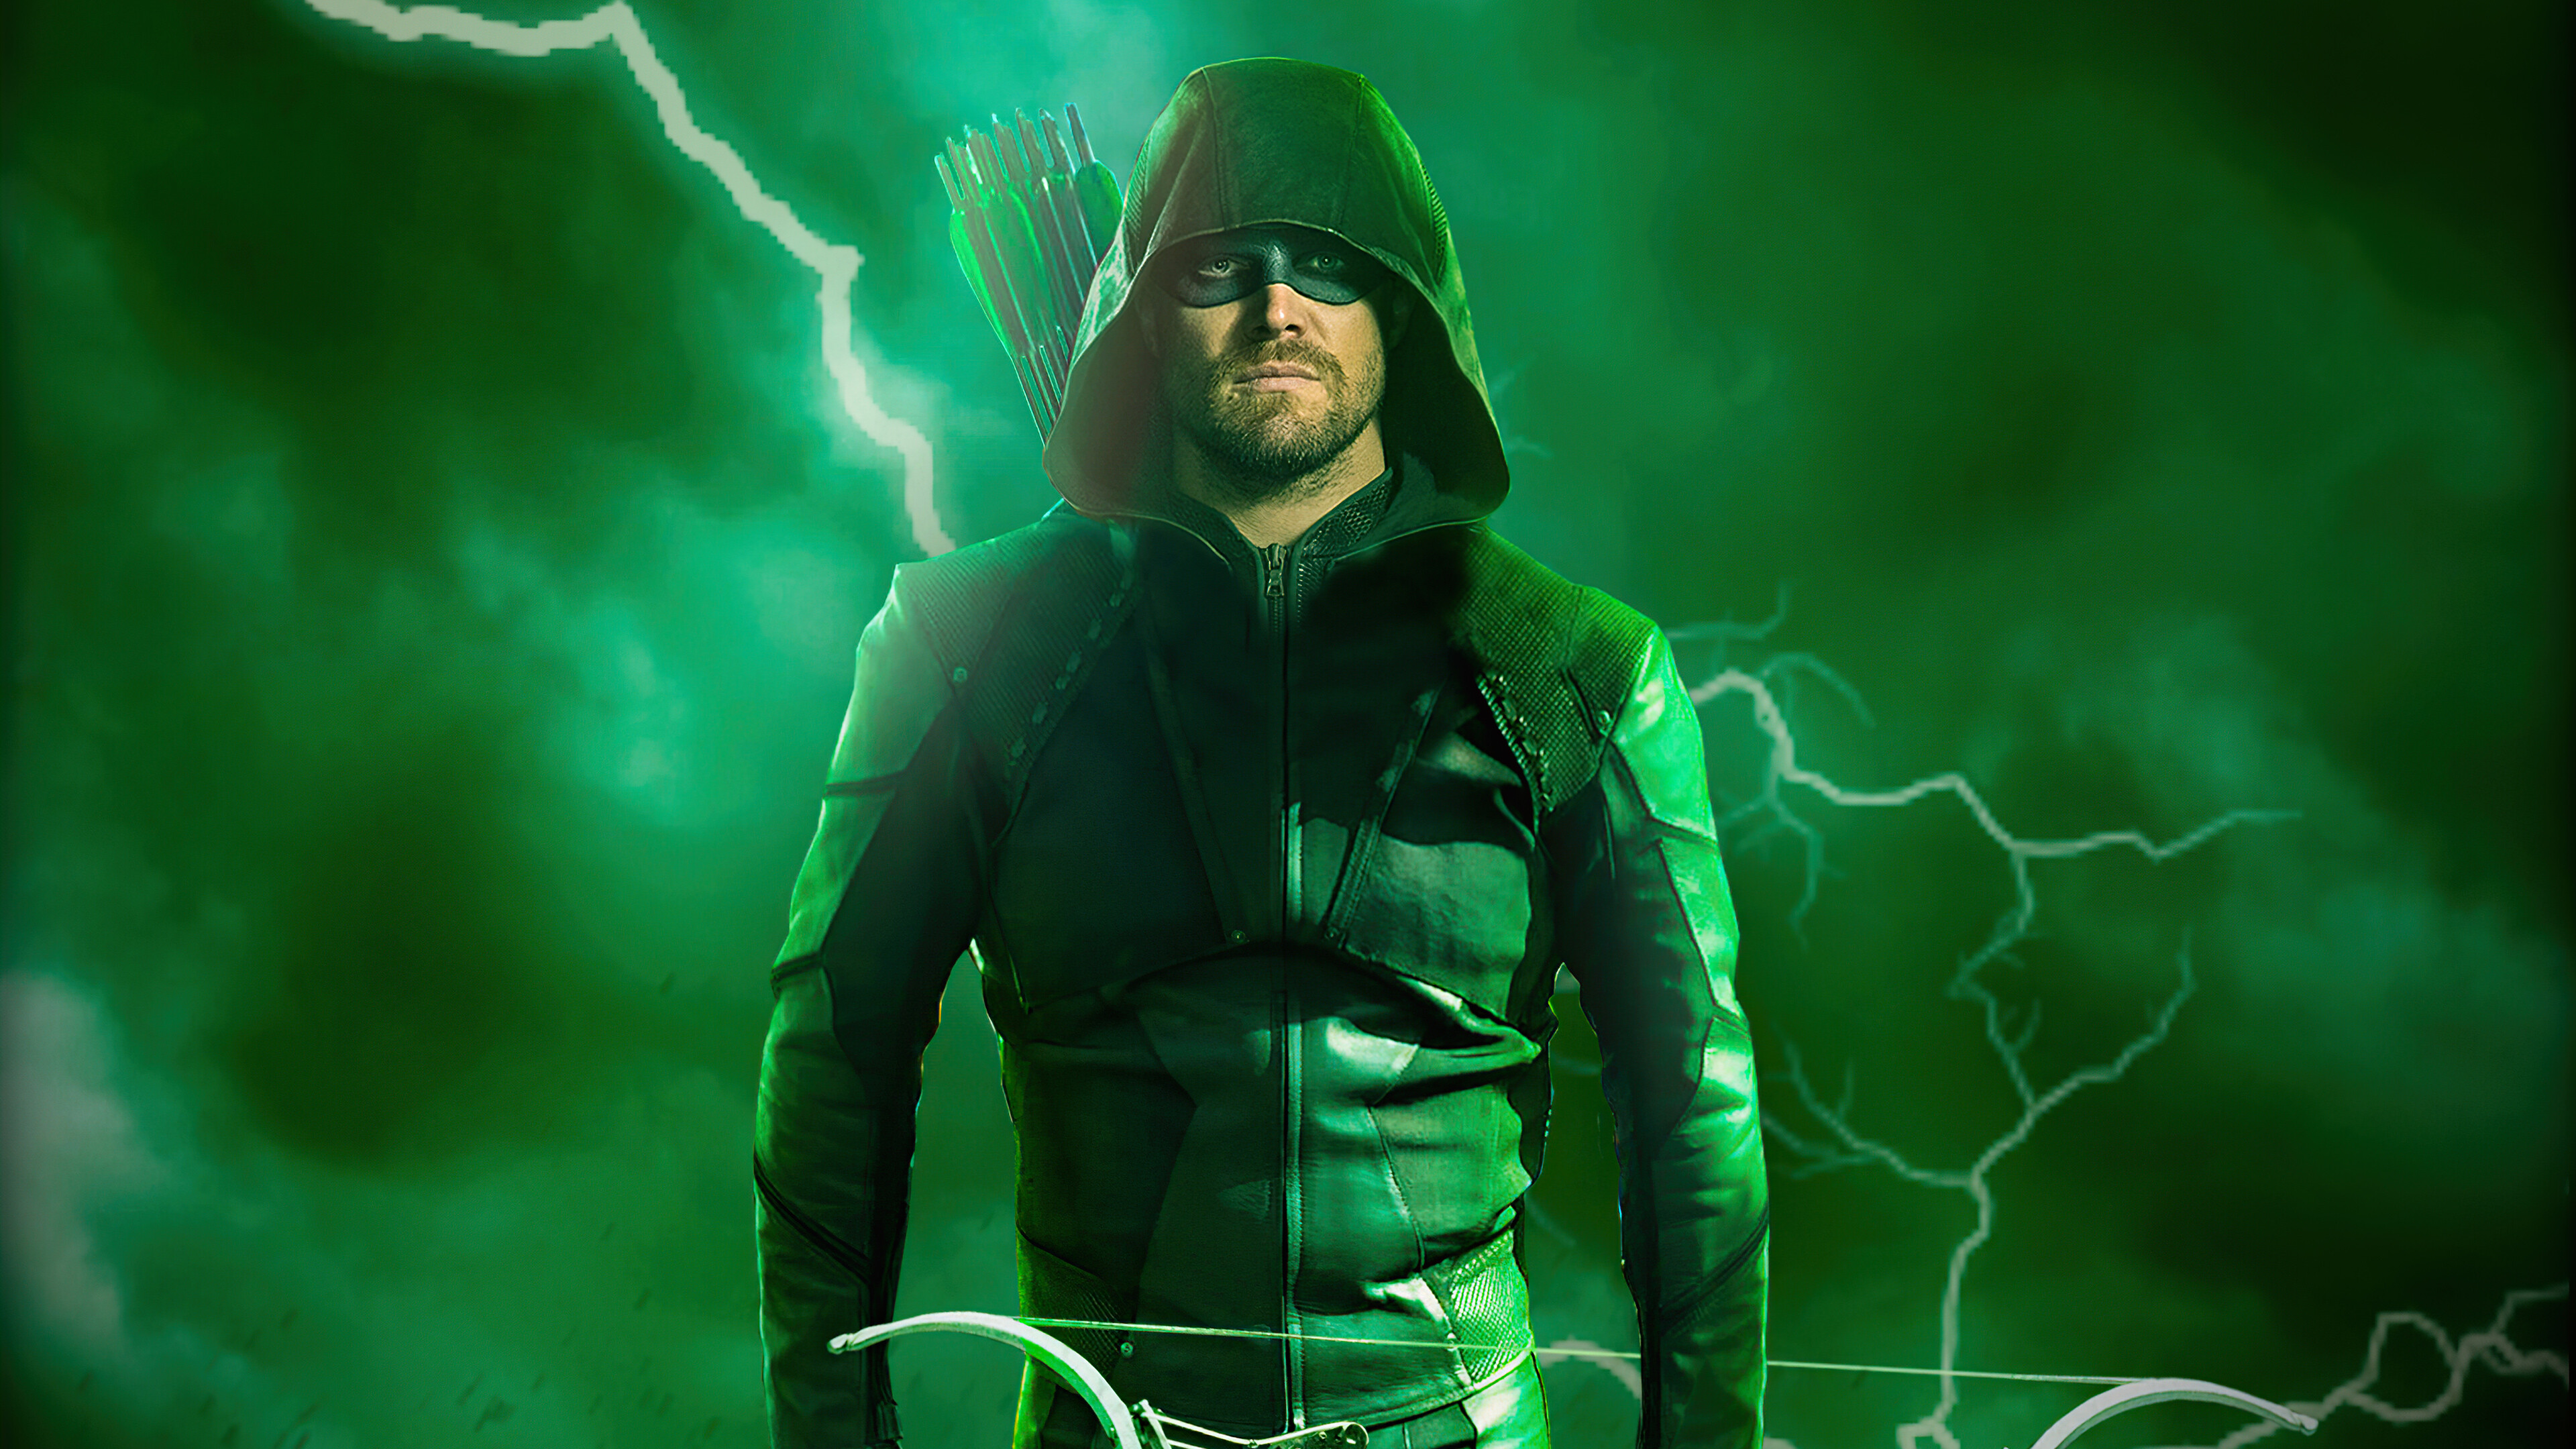 Green Arrow: A superhero who appears in American comic books published by DC Comics, Oliver Queen. 3840x2160 4K Background.